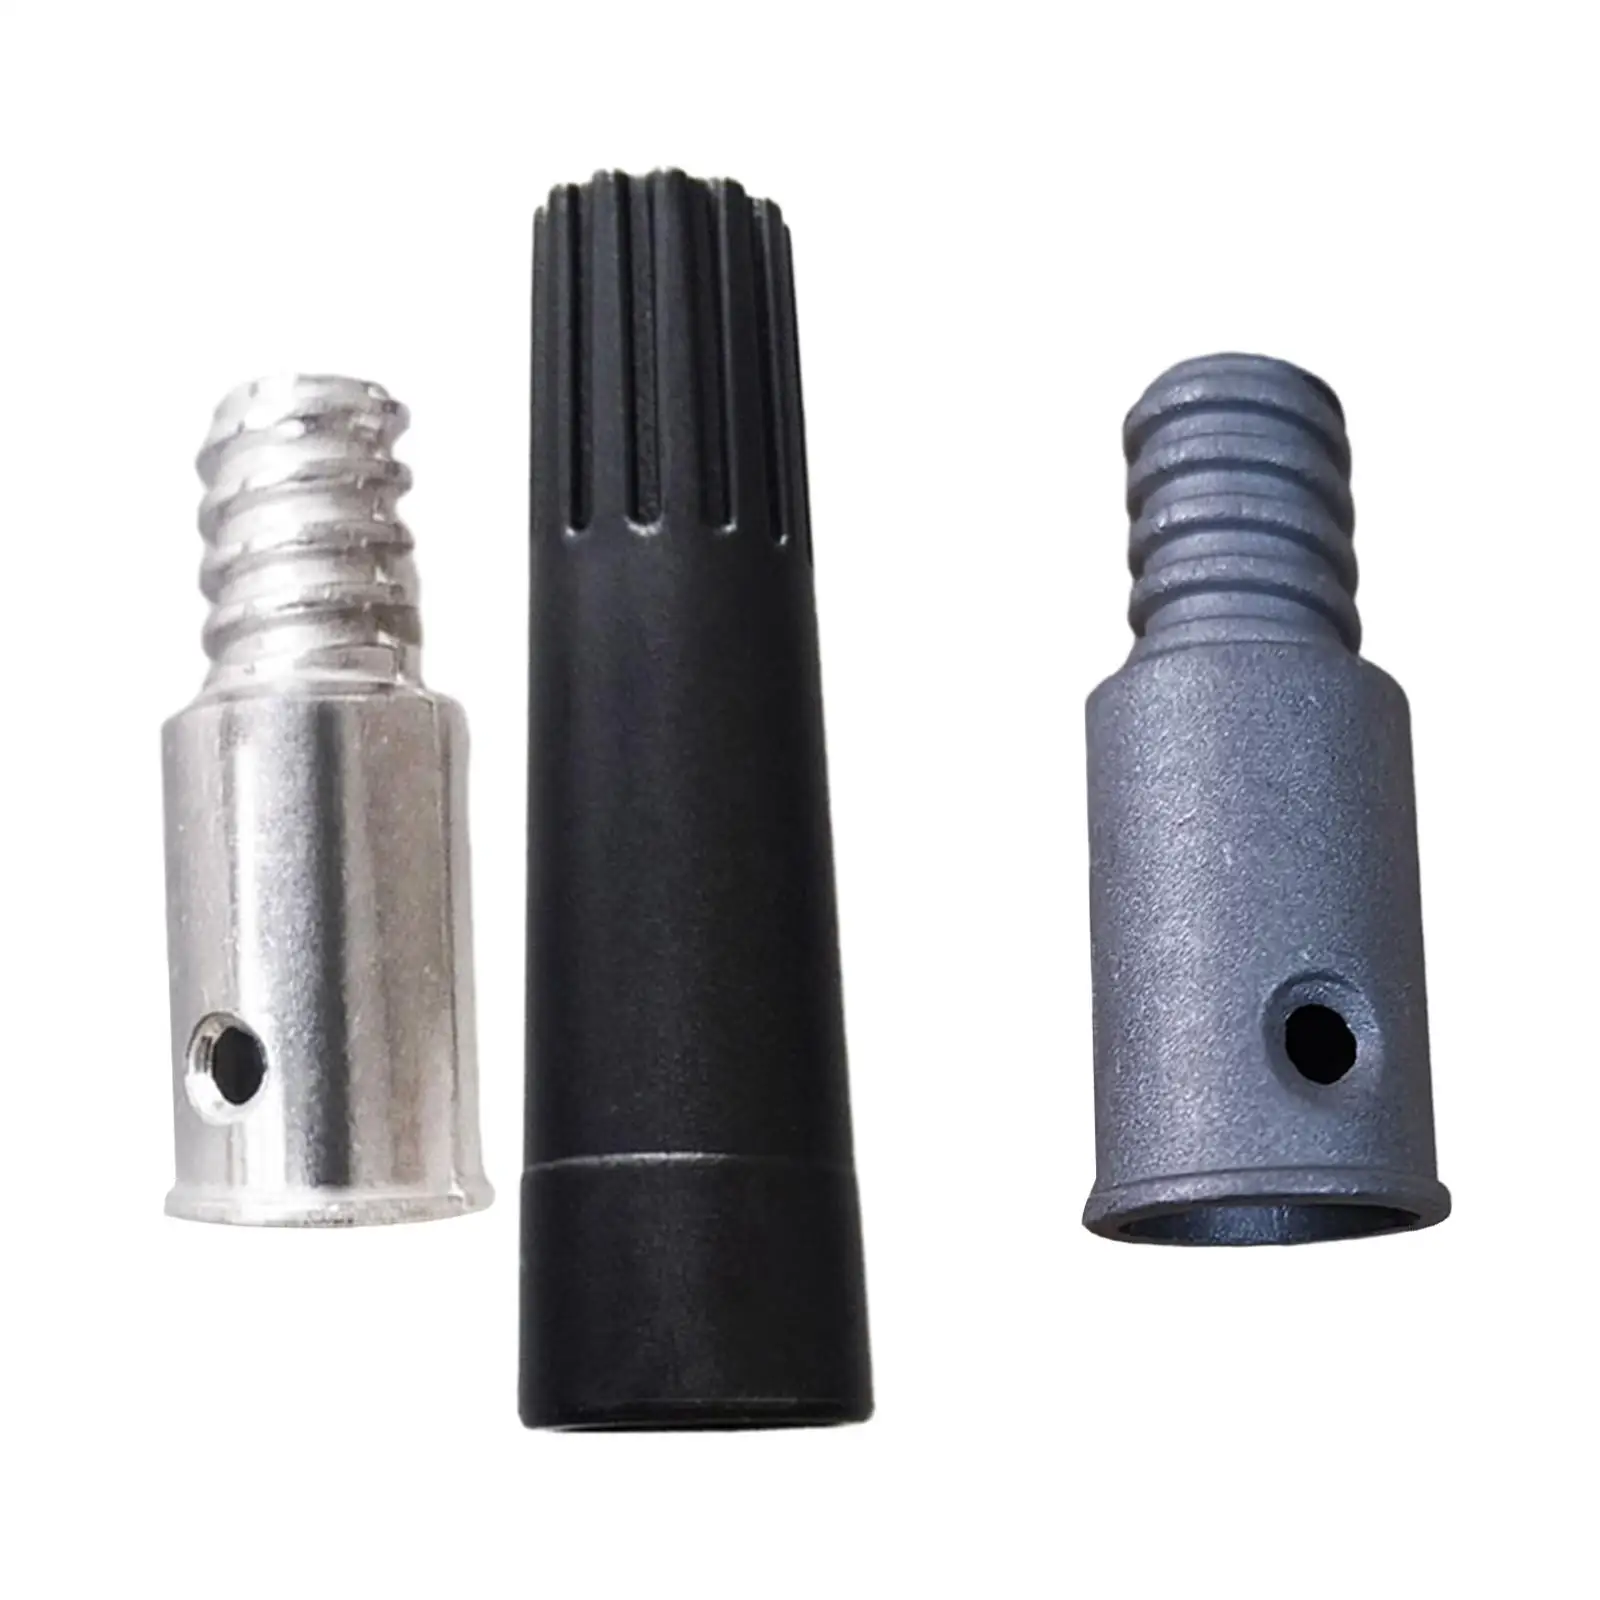 

Extension Pole Practical Heavy Duty Metal Fittings Replacement Threaded Tip for Telescopic Pole Cleaning Tools Broom Mop Head